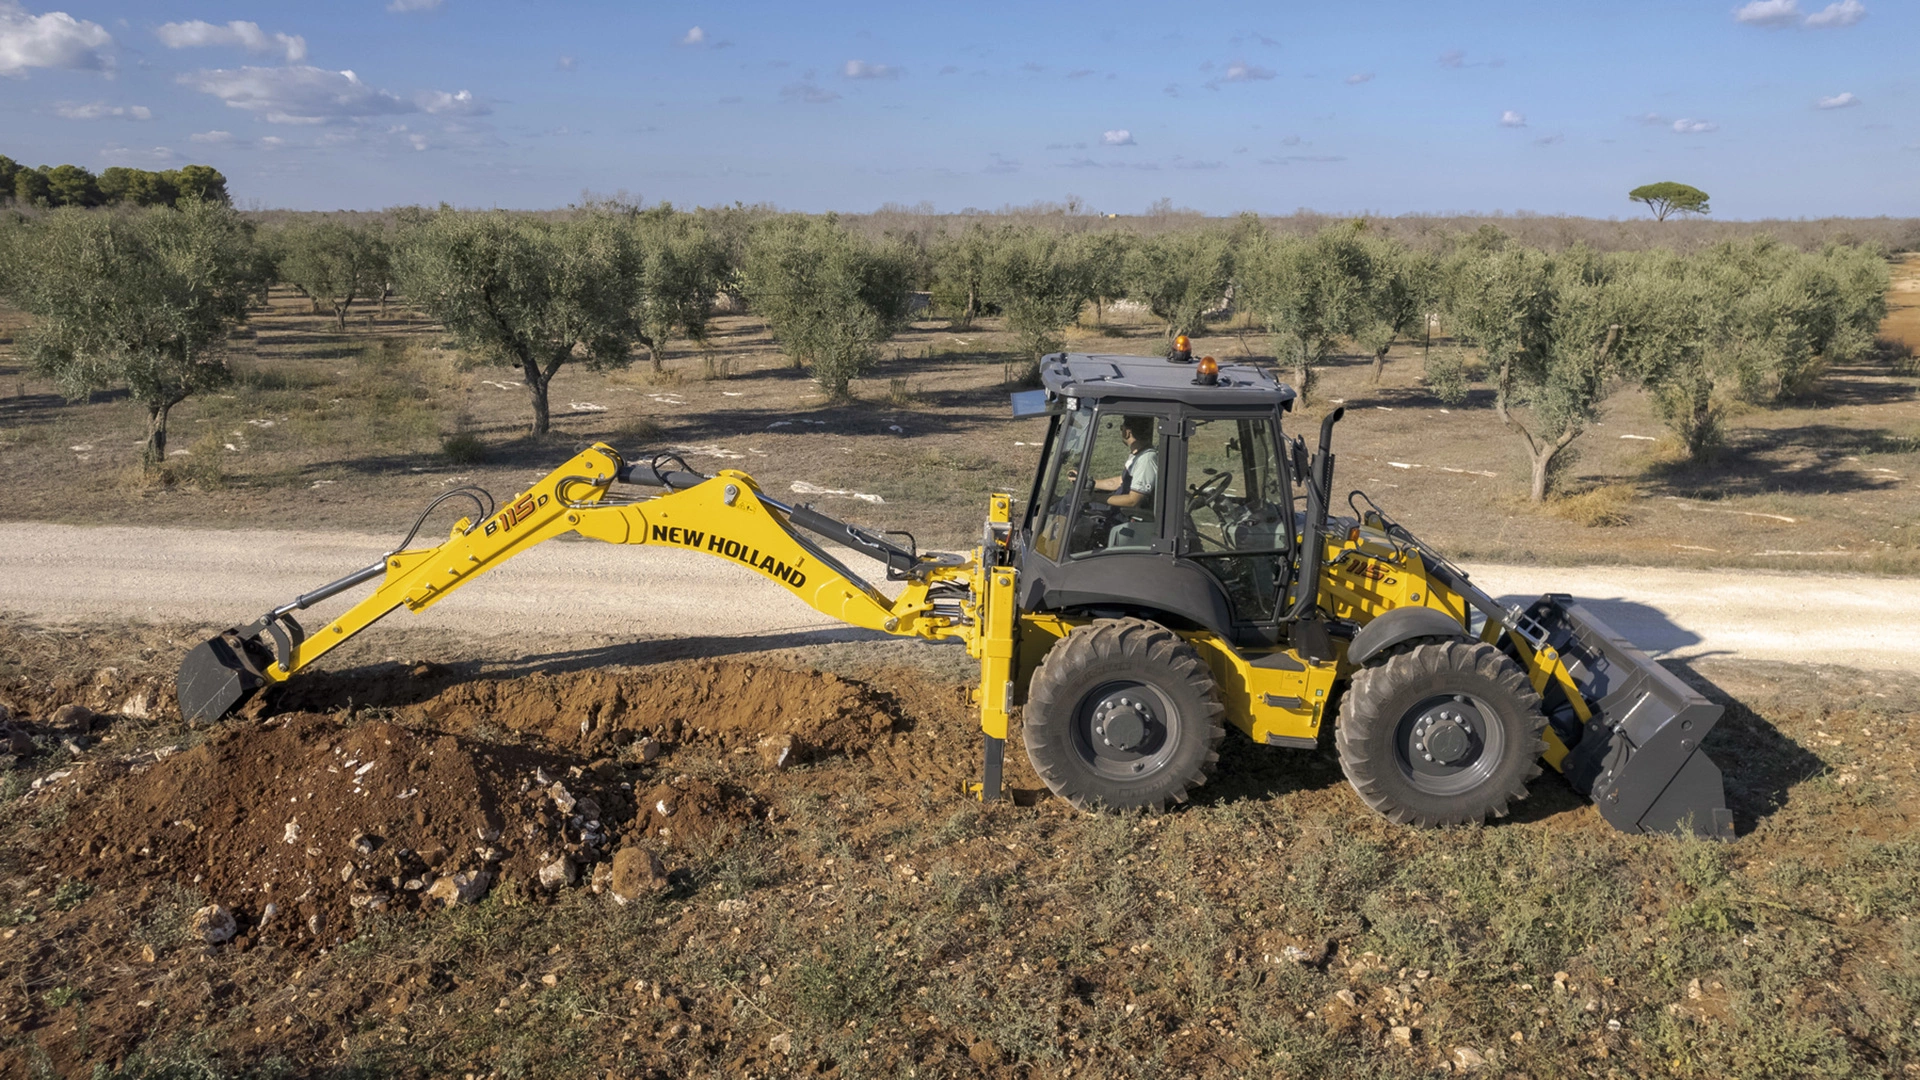 New Holland Backhoe at work, digging in rocky terrain, clear sky, operator in cabin, olive trees in background.